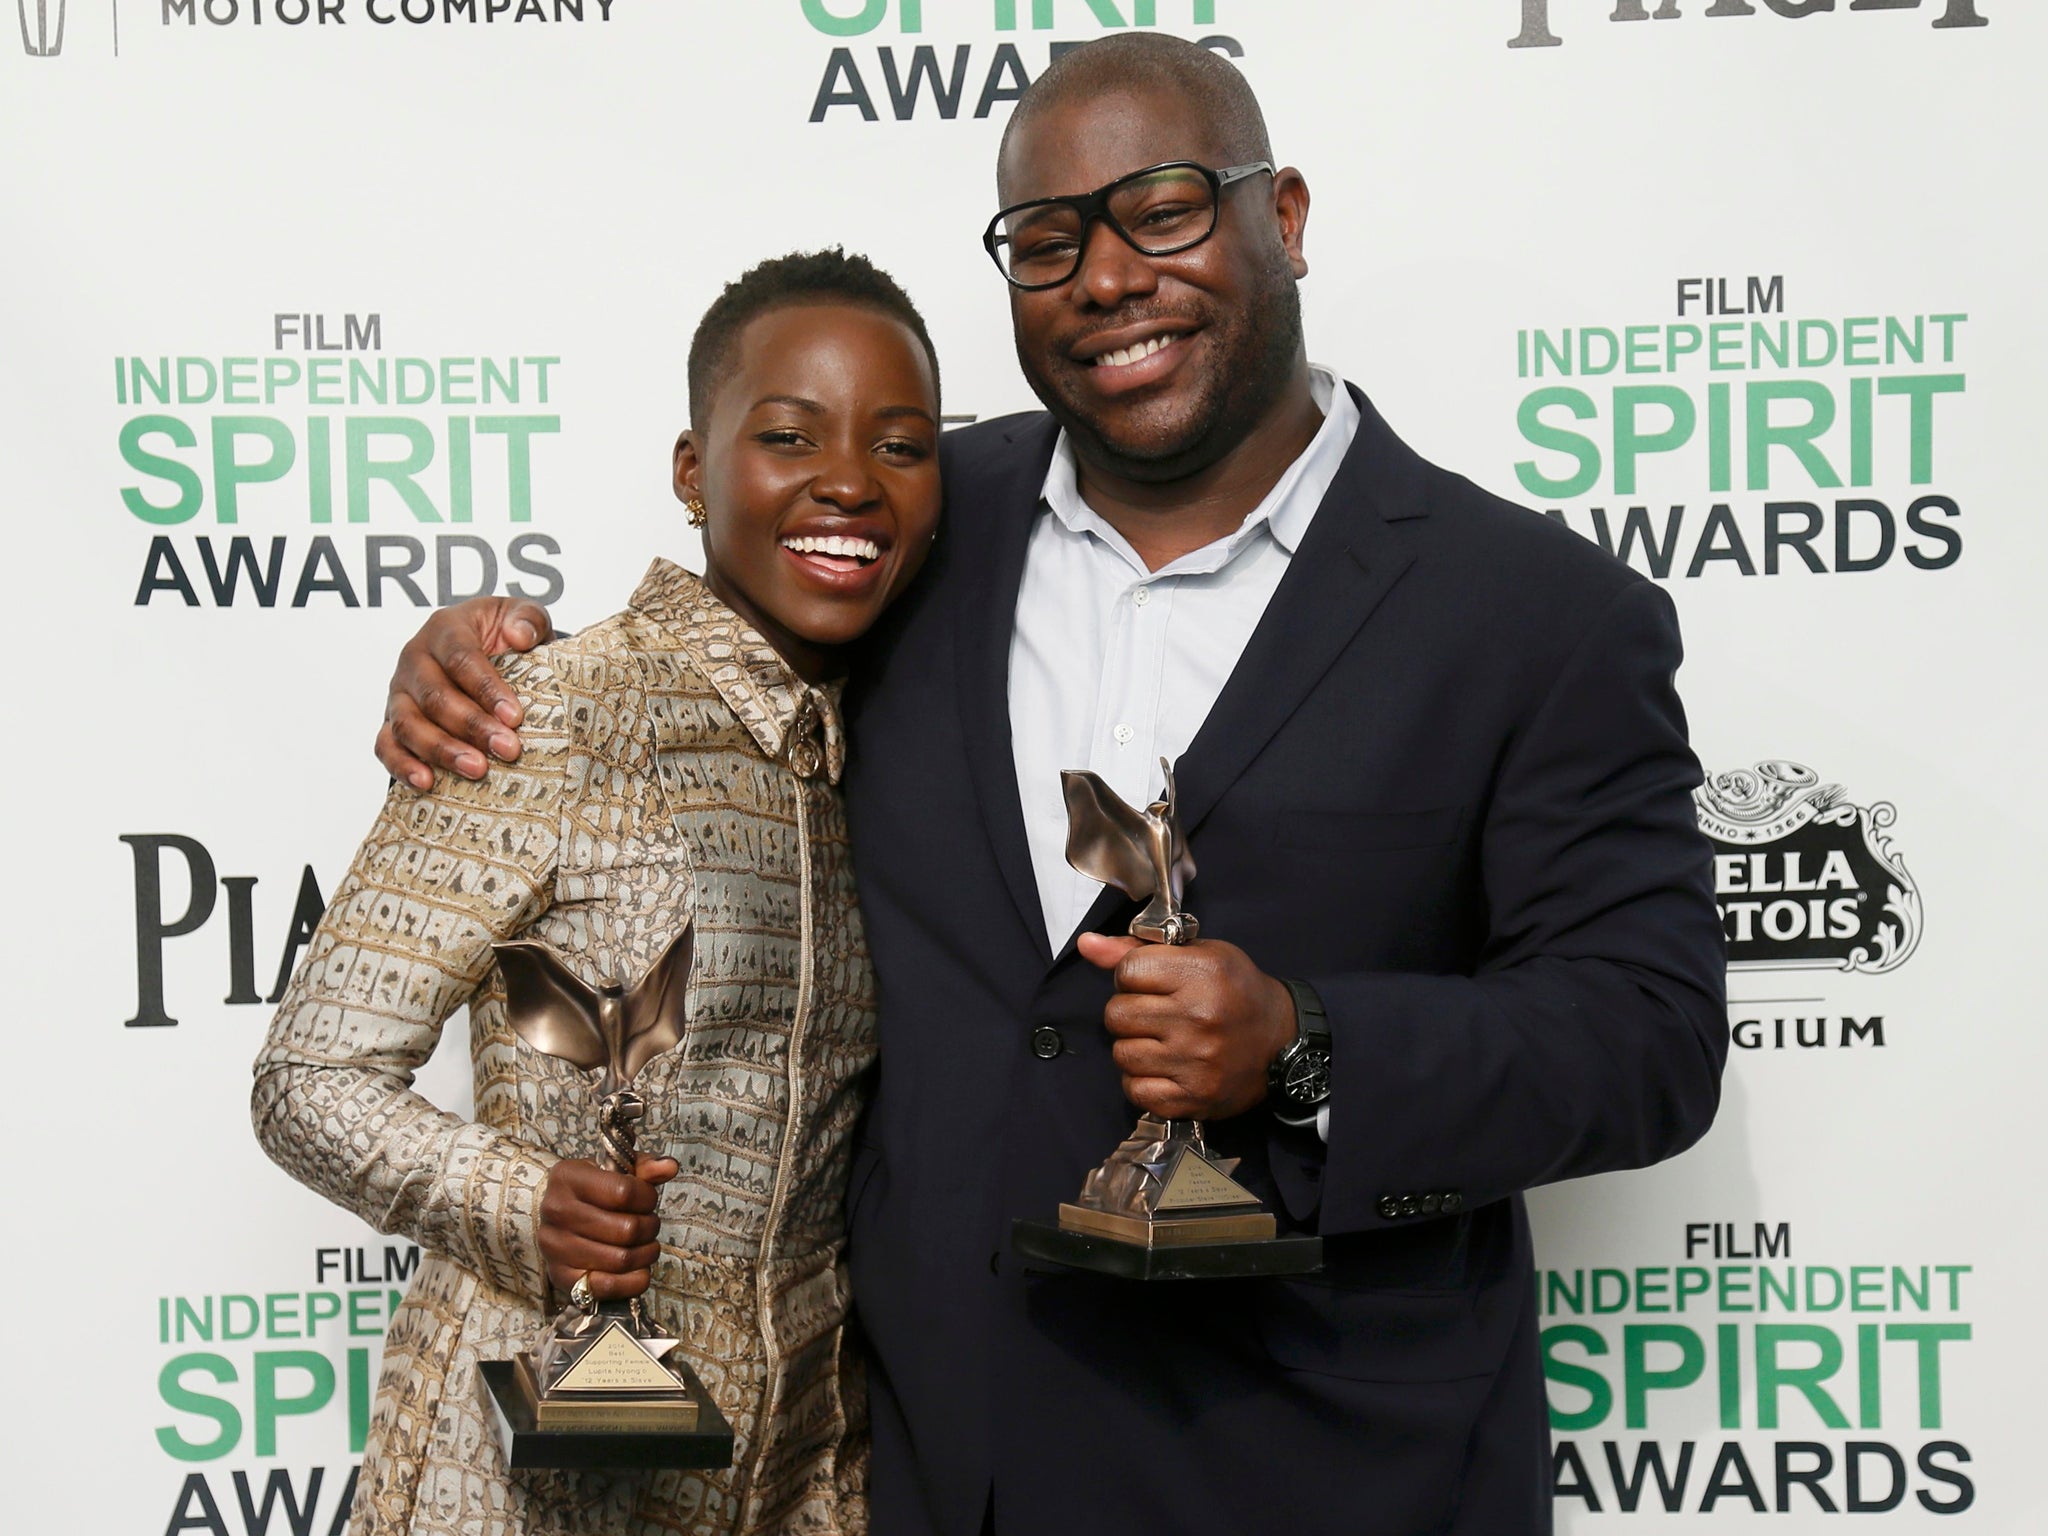 Actress Lupita Nyong'o and director Steve McQueen pose with their awards for 12 Years a Slave backstage at the 2014 Film Independent Spirit Awards in Santa Monica